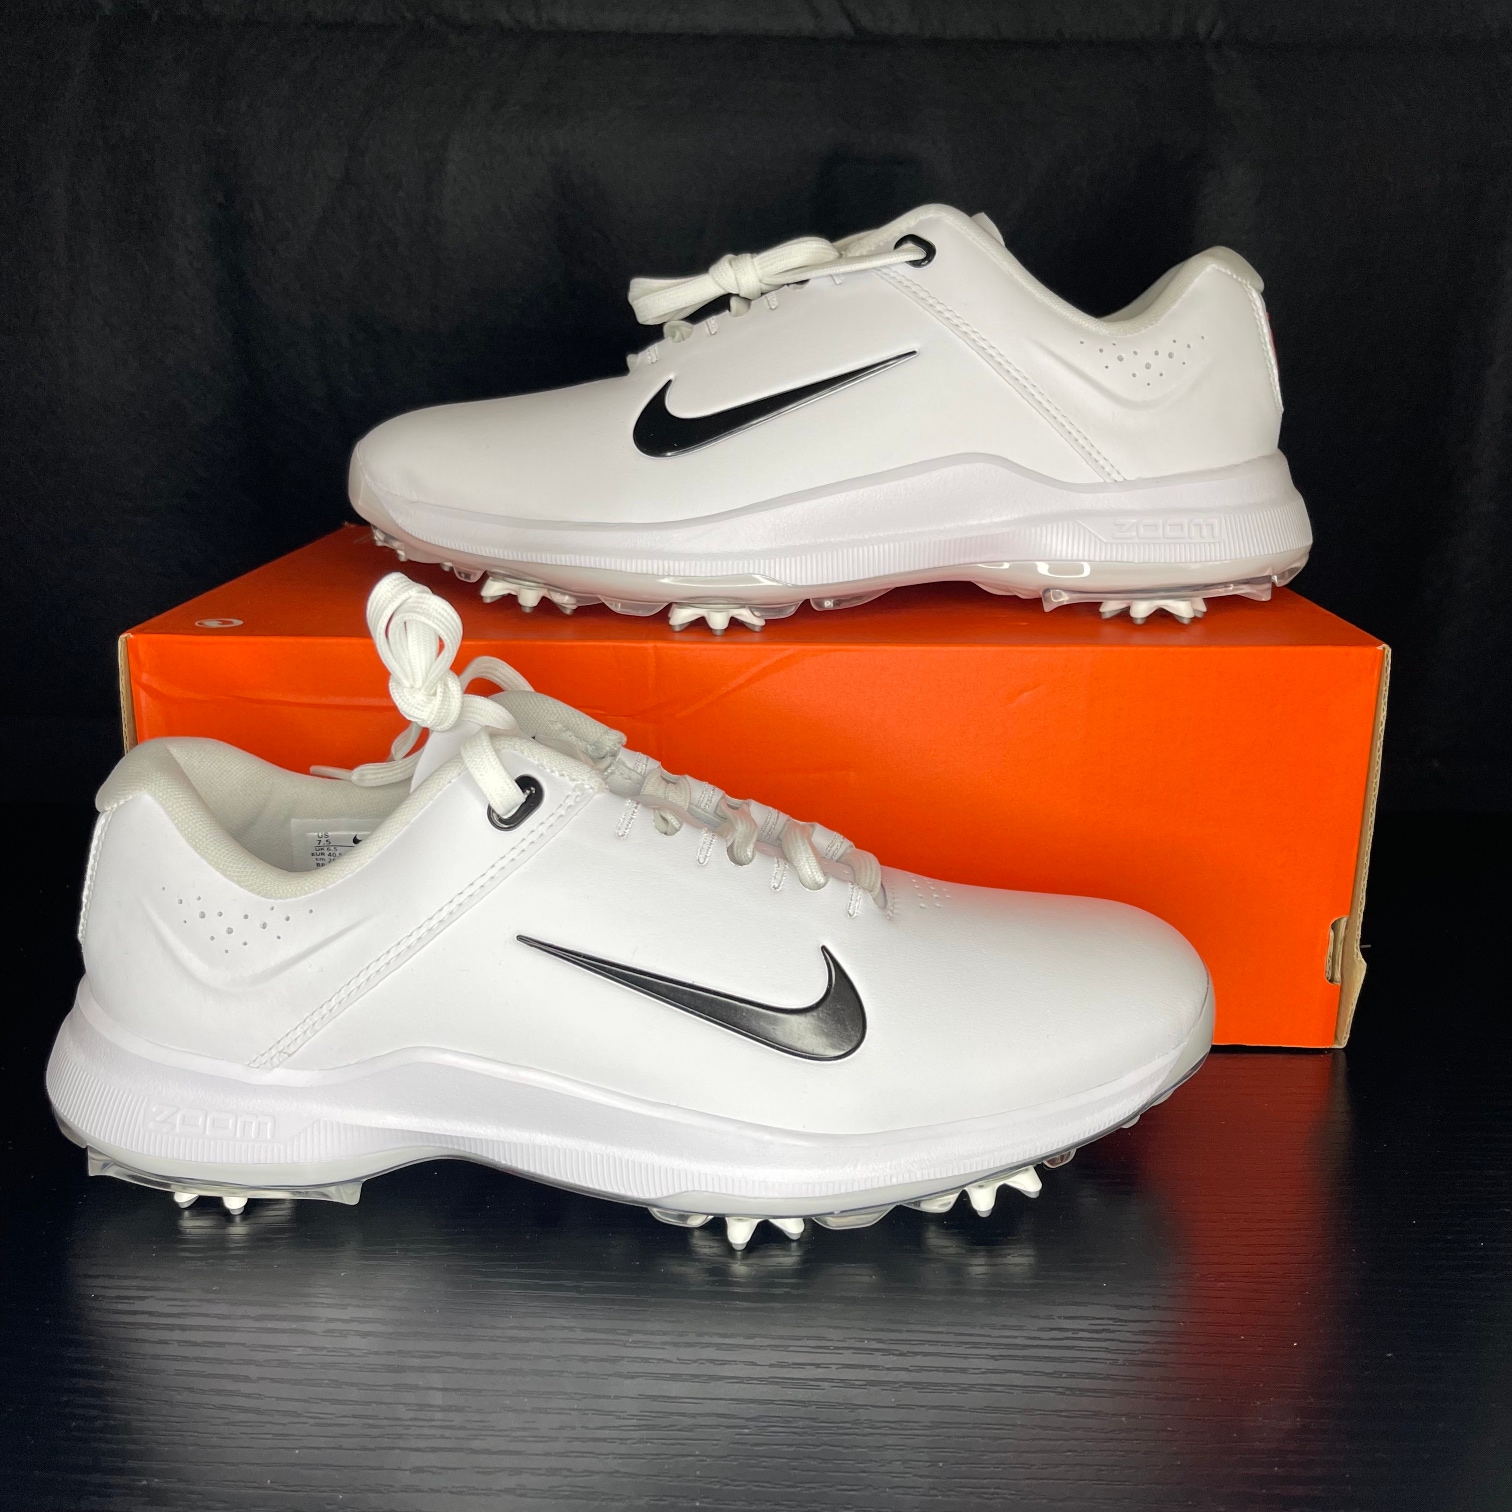 Nike Air Zoom Tiger Woods TW20 Men's Golf Shoes White Red Size 7 CI4510-100